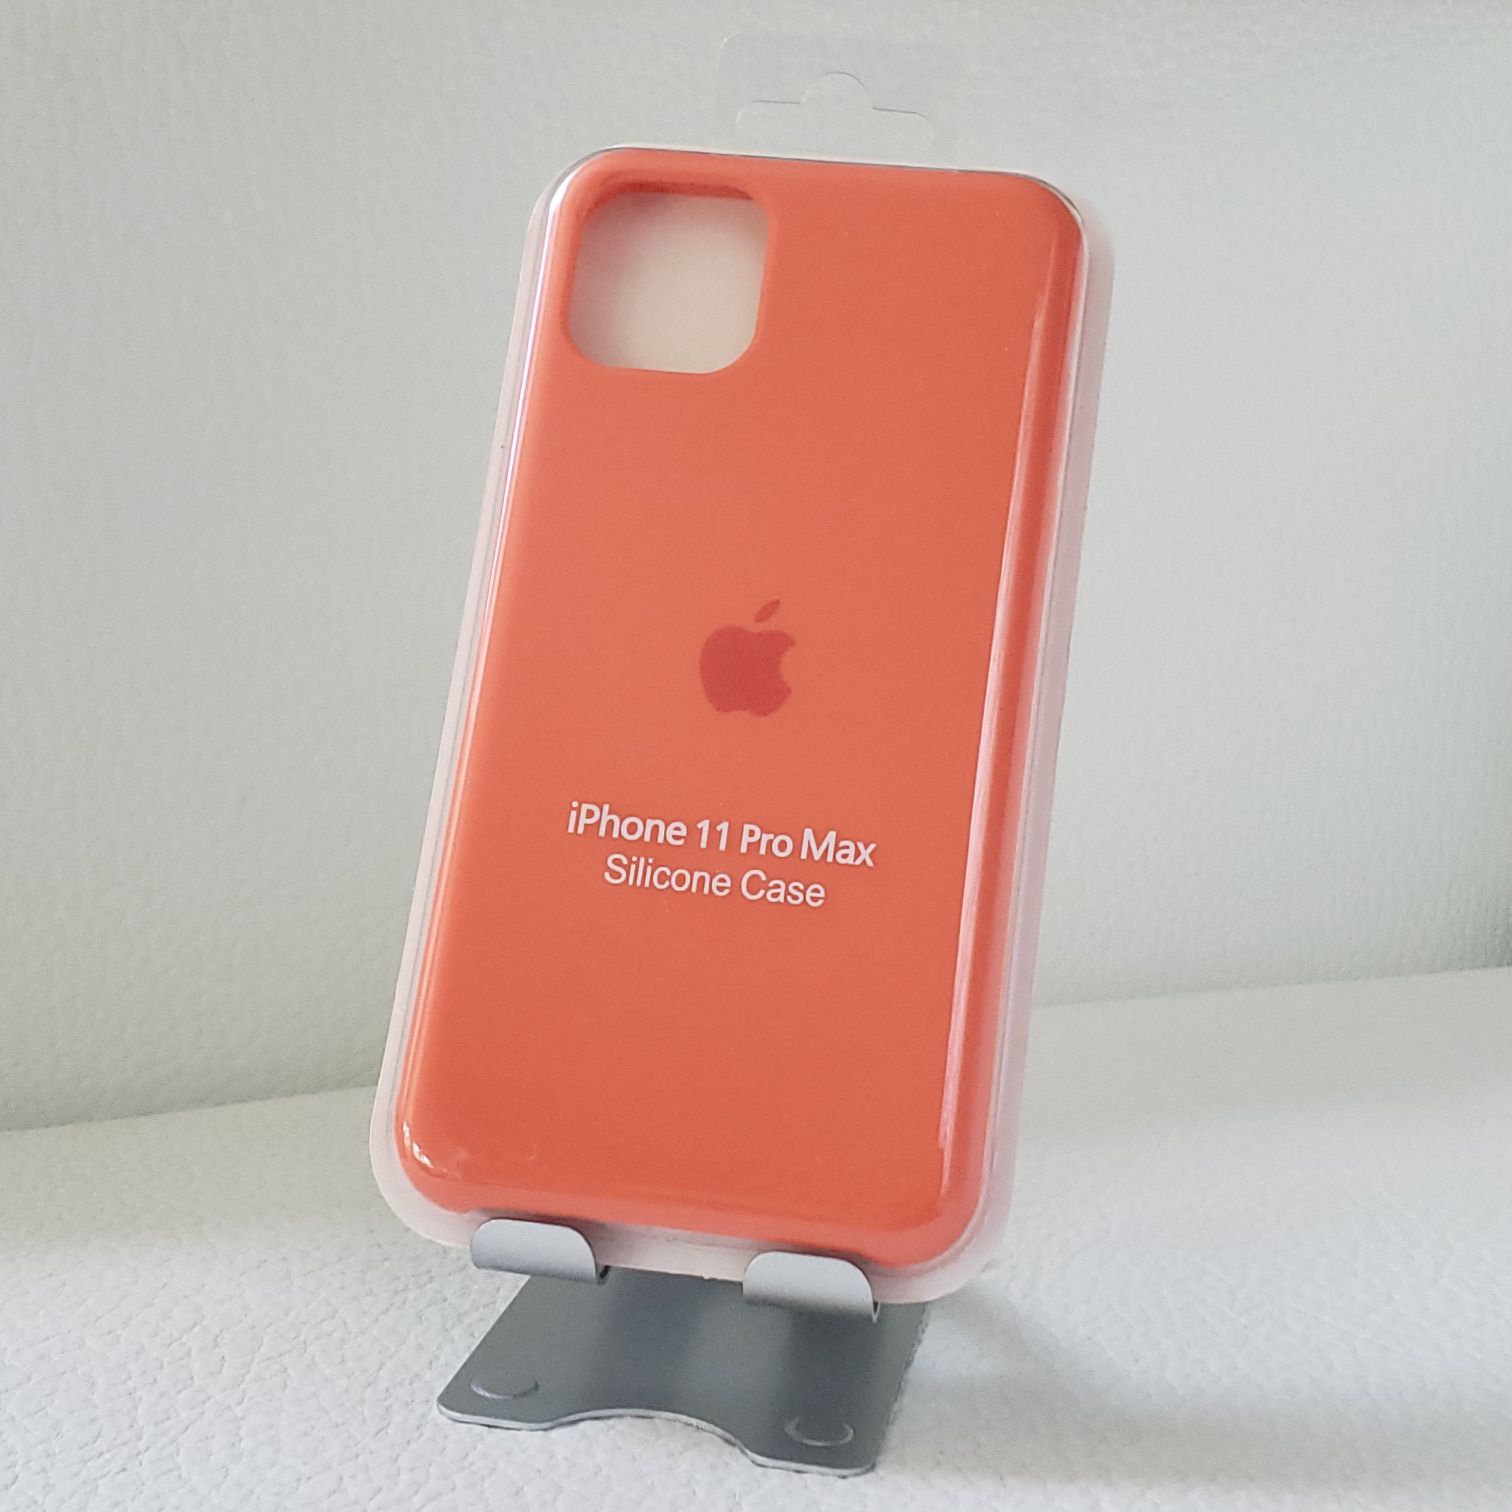 Apple Silicone case for iPhone 11 Pro Max - CLEMENTINE COLOR $10